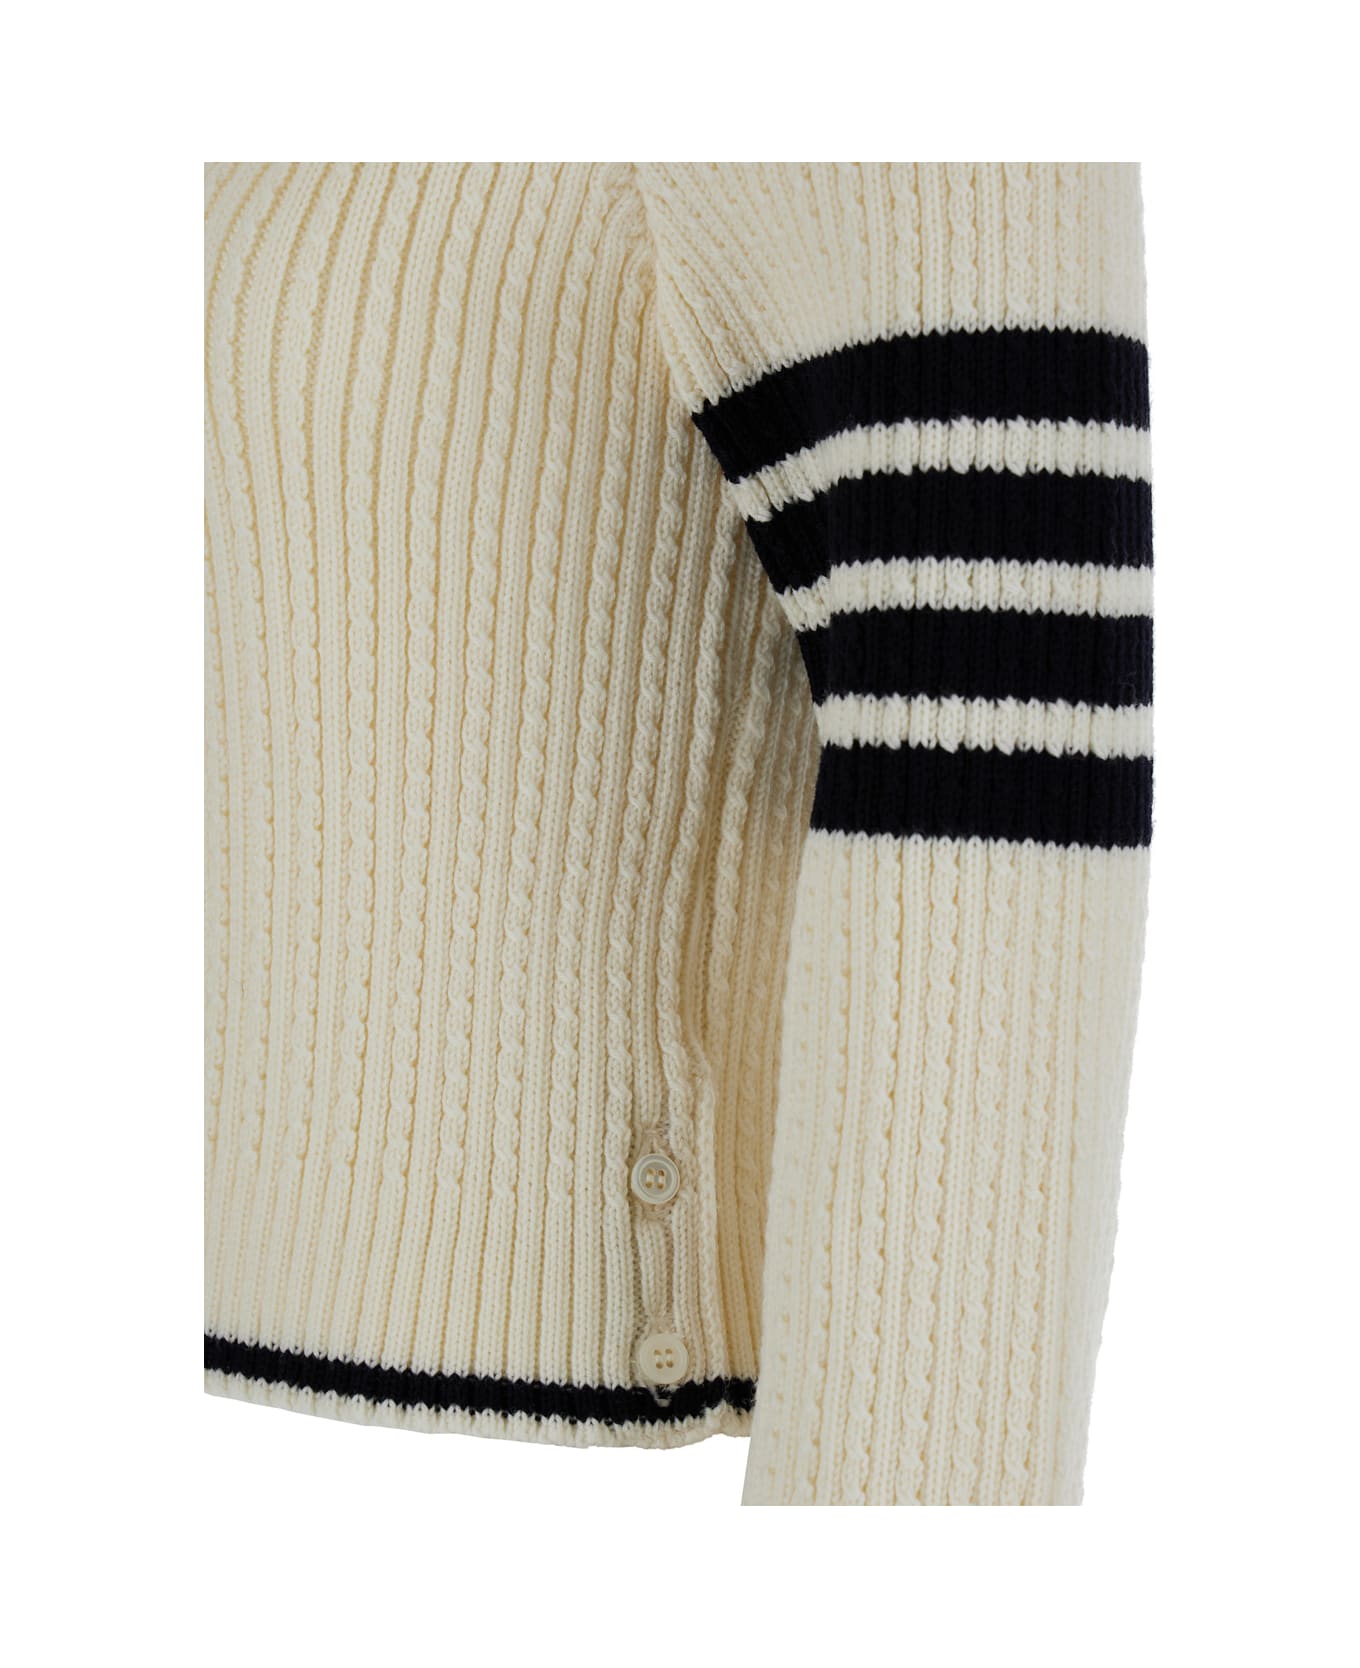 Thom Browne White Sweater With 4-bar Detail In Knit Woman - White ニットウェア